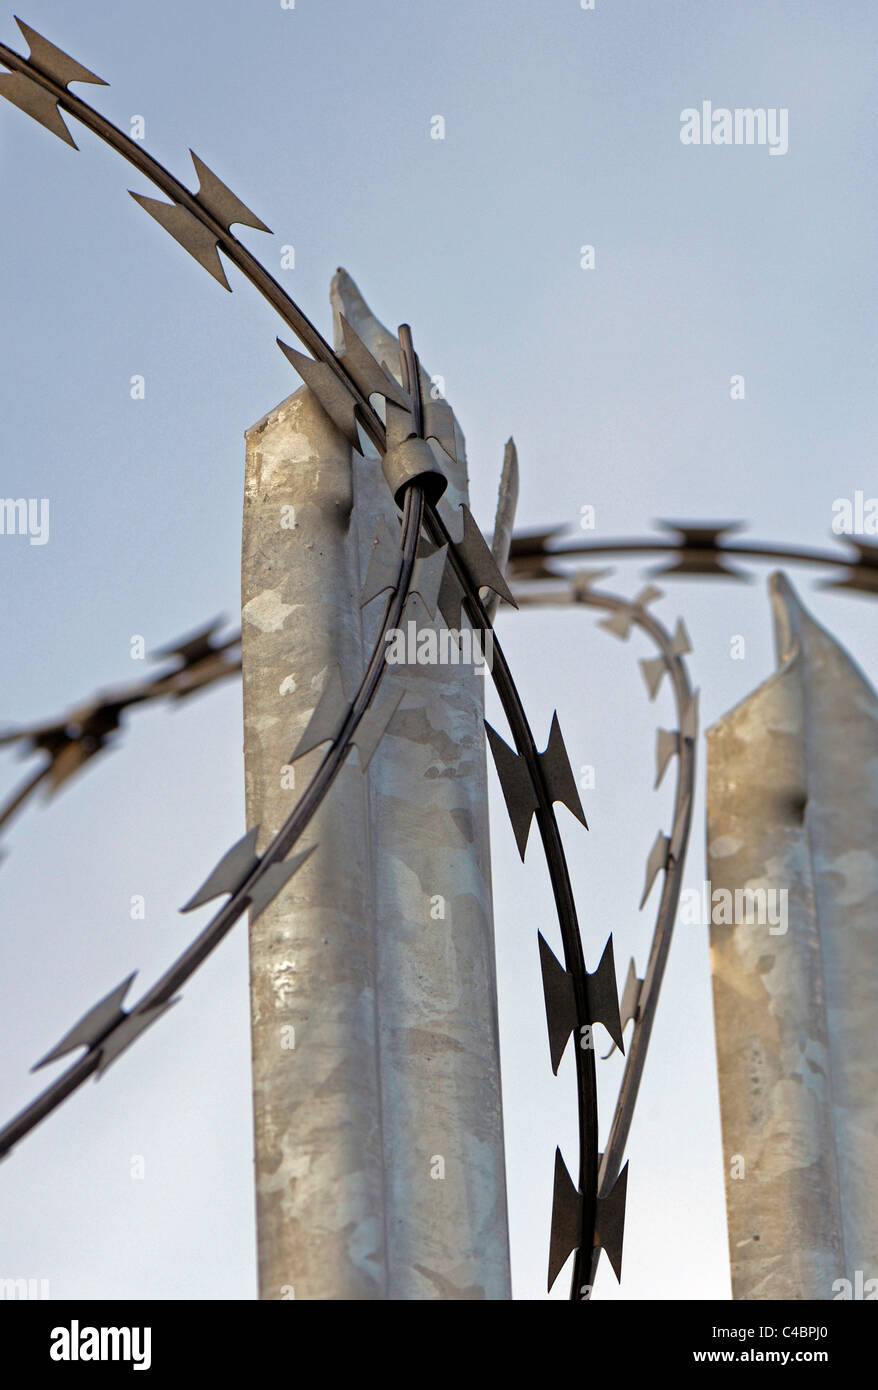 Concertina razor wire mounted onto galvanized steel  pointed fence. Stock Photo